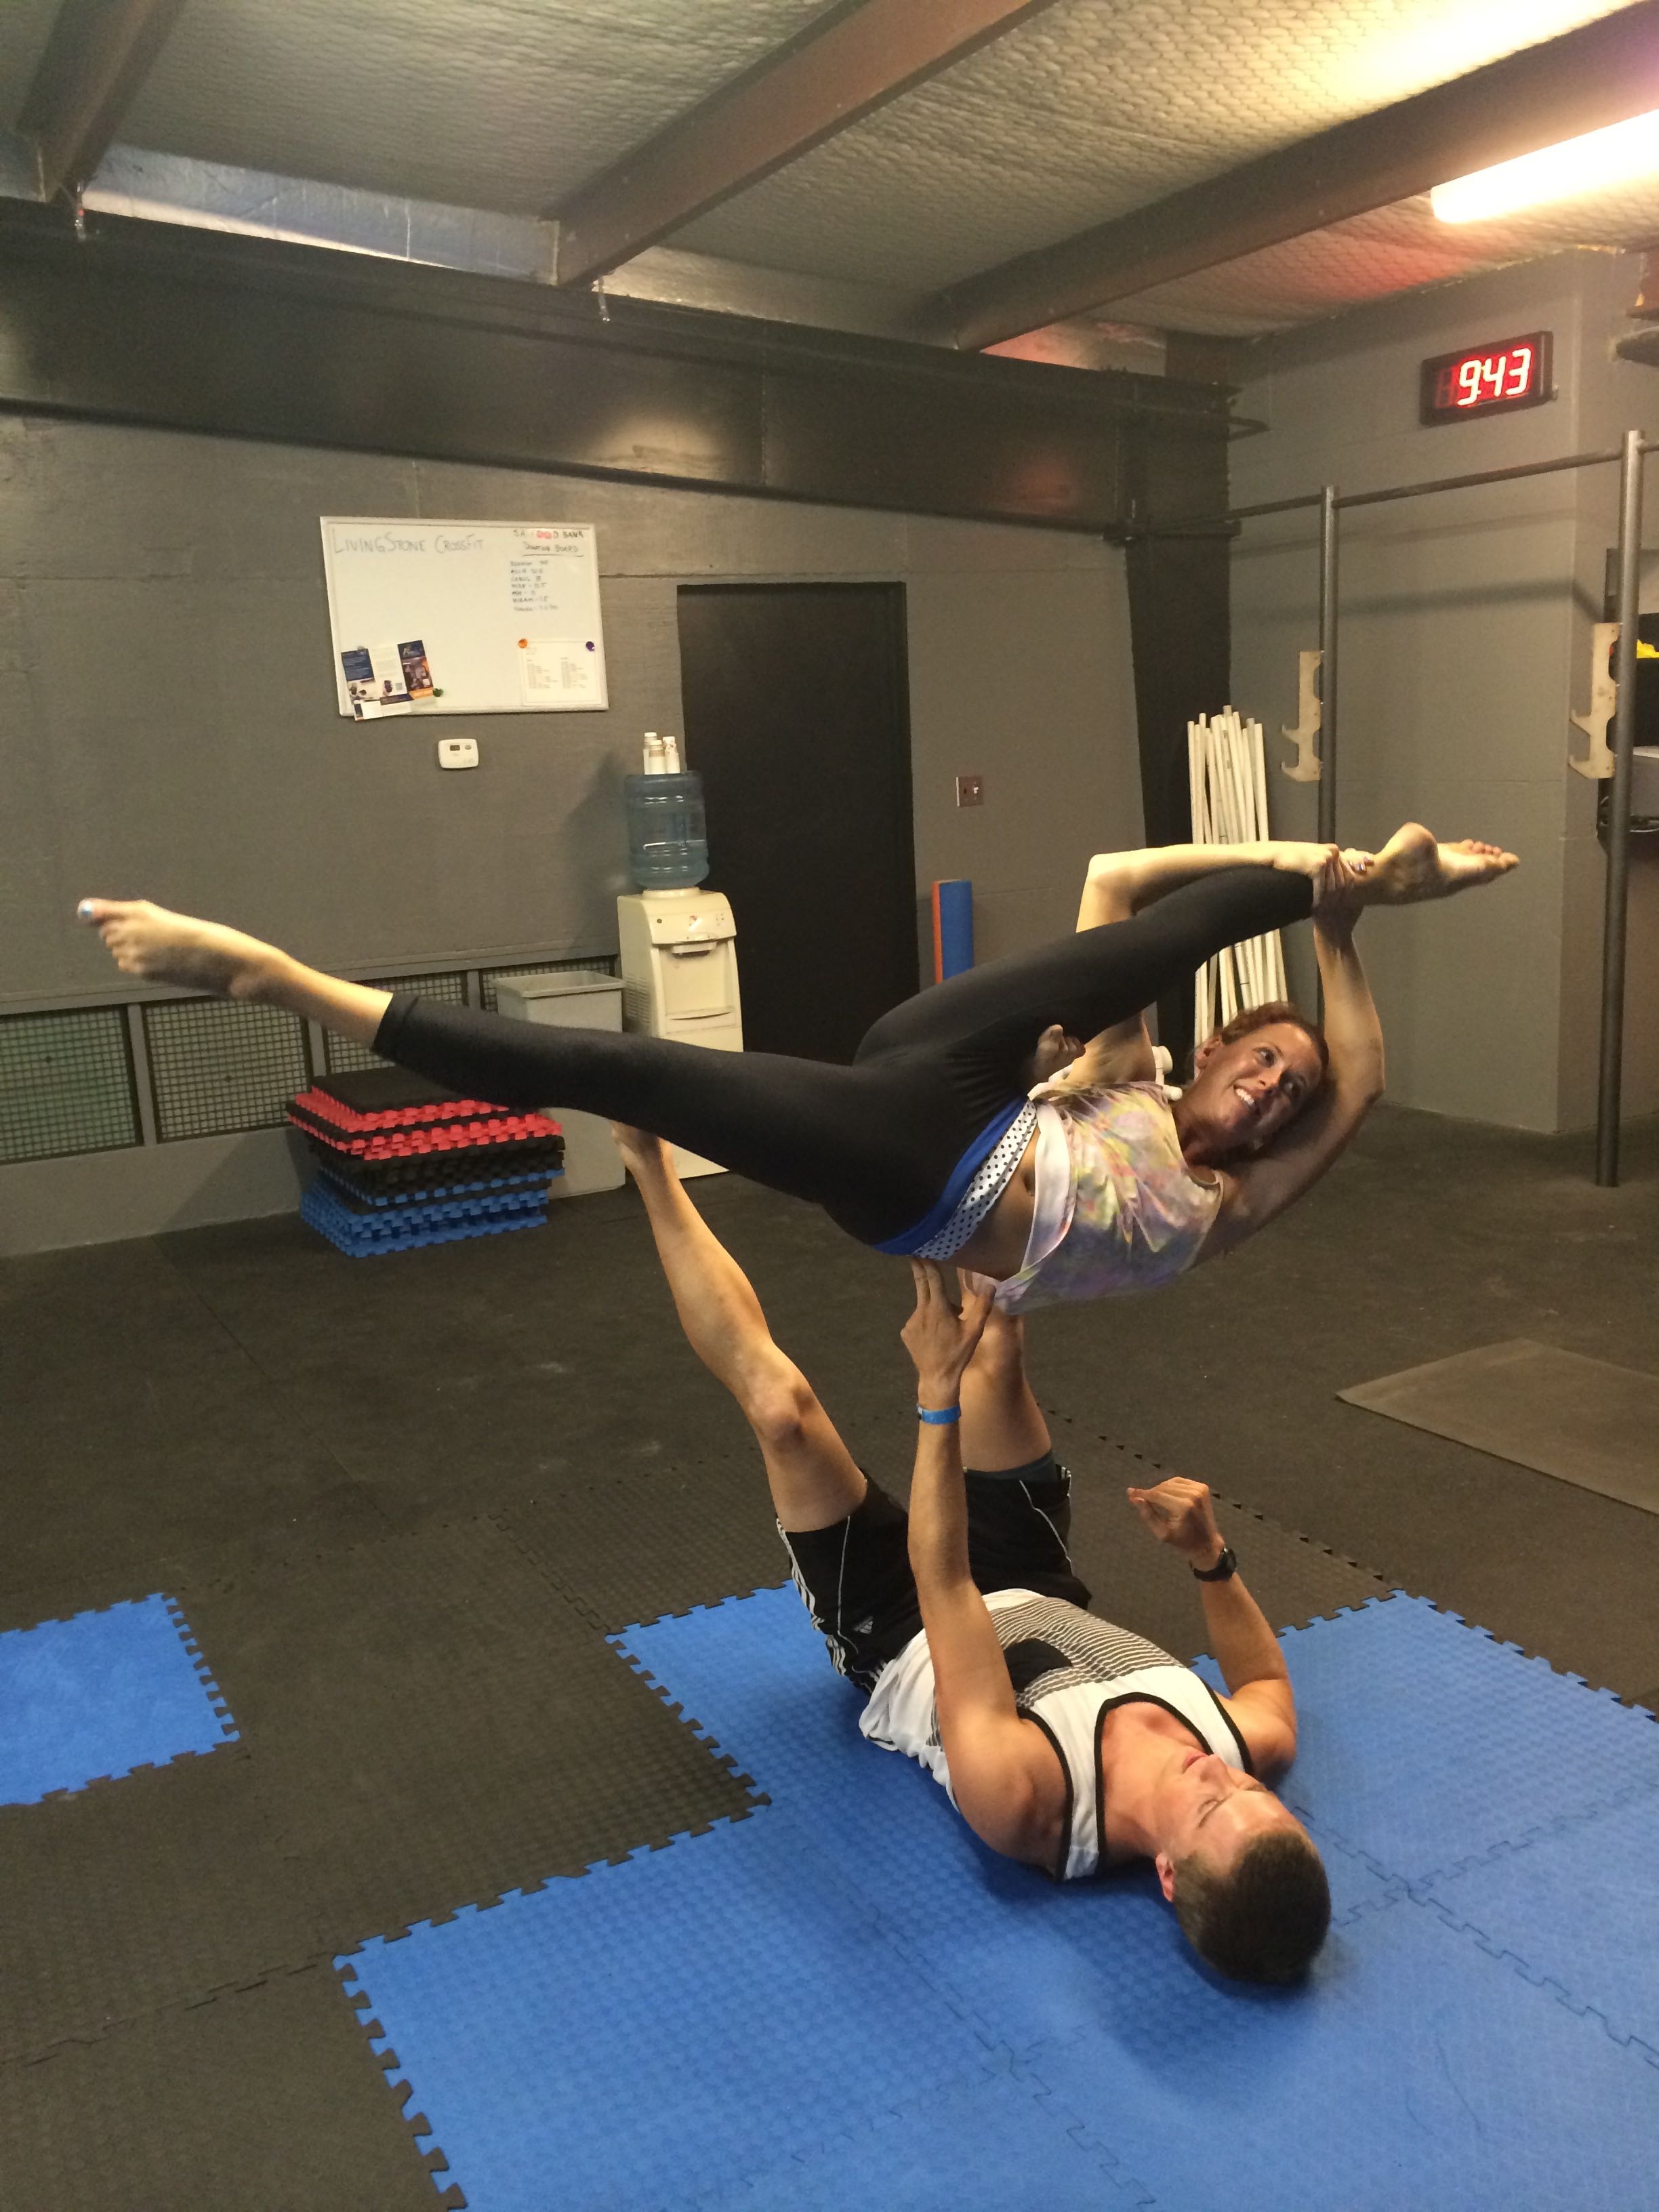 a man and woman doing acrobatic exercises